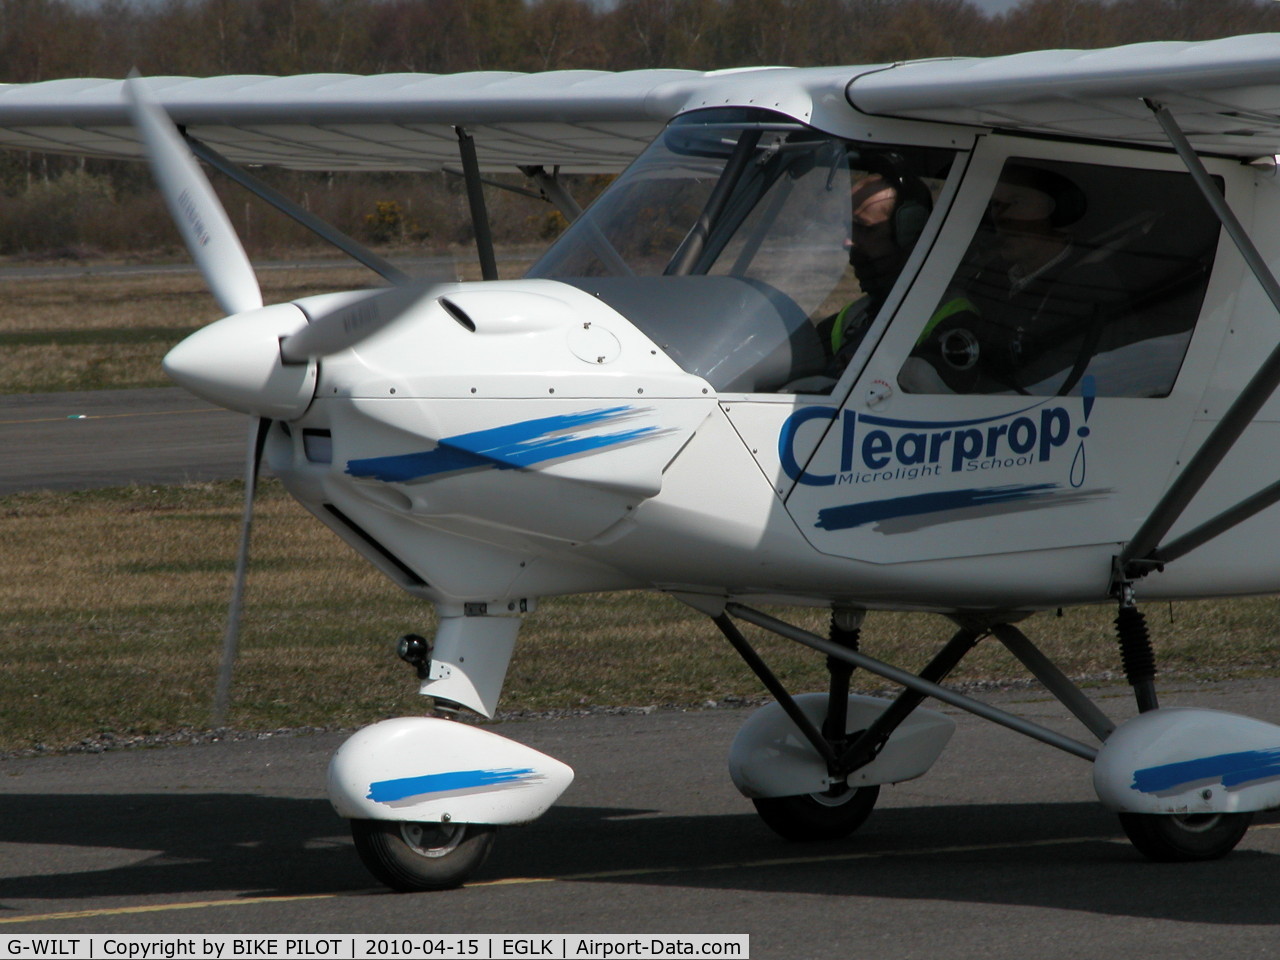 G-WILT, 2005 Comco Ikarus C42 FB100 C/N 0506-6687, C42 FROM THE NEW MICROLIGHT FLYING SCHOOL